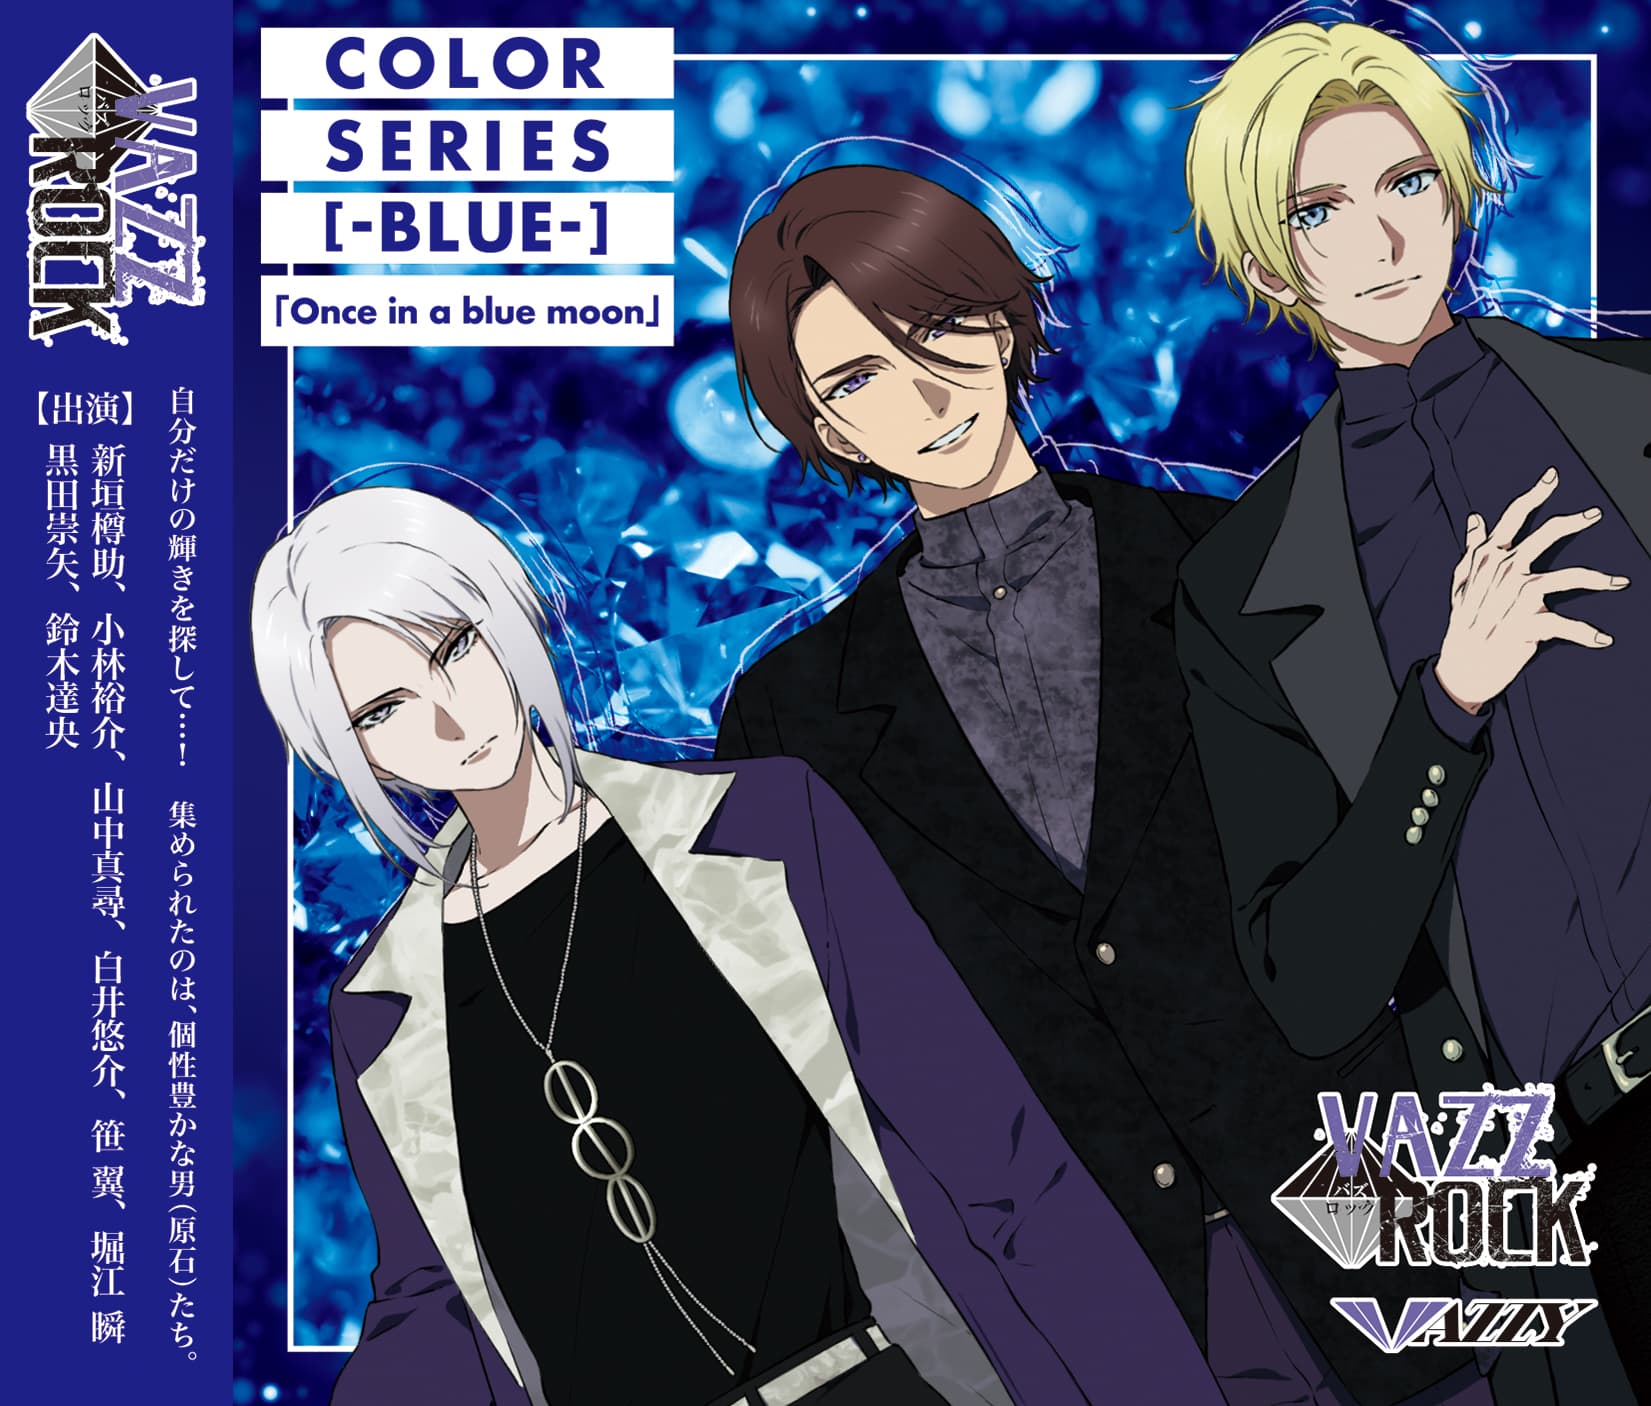 「VAZZROCK」COLORシリーズ [-BLUE-]「Once in a blue moon」